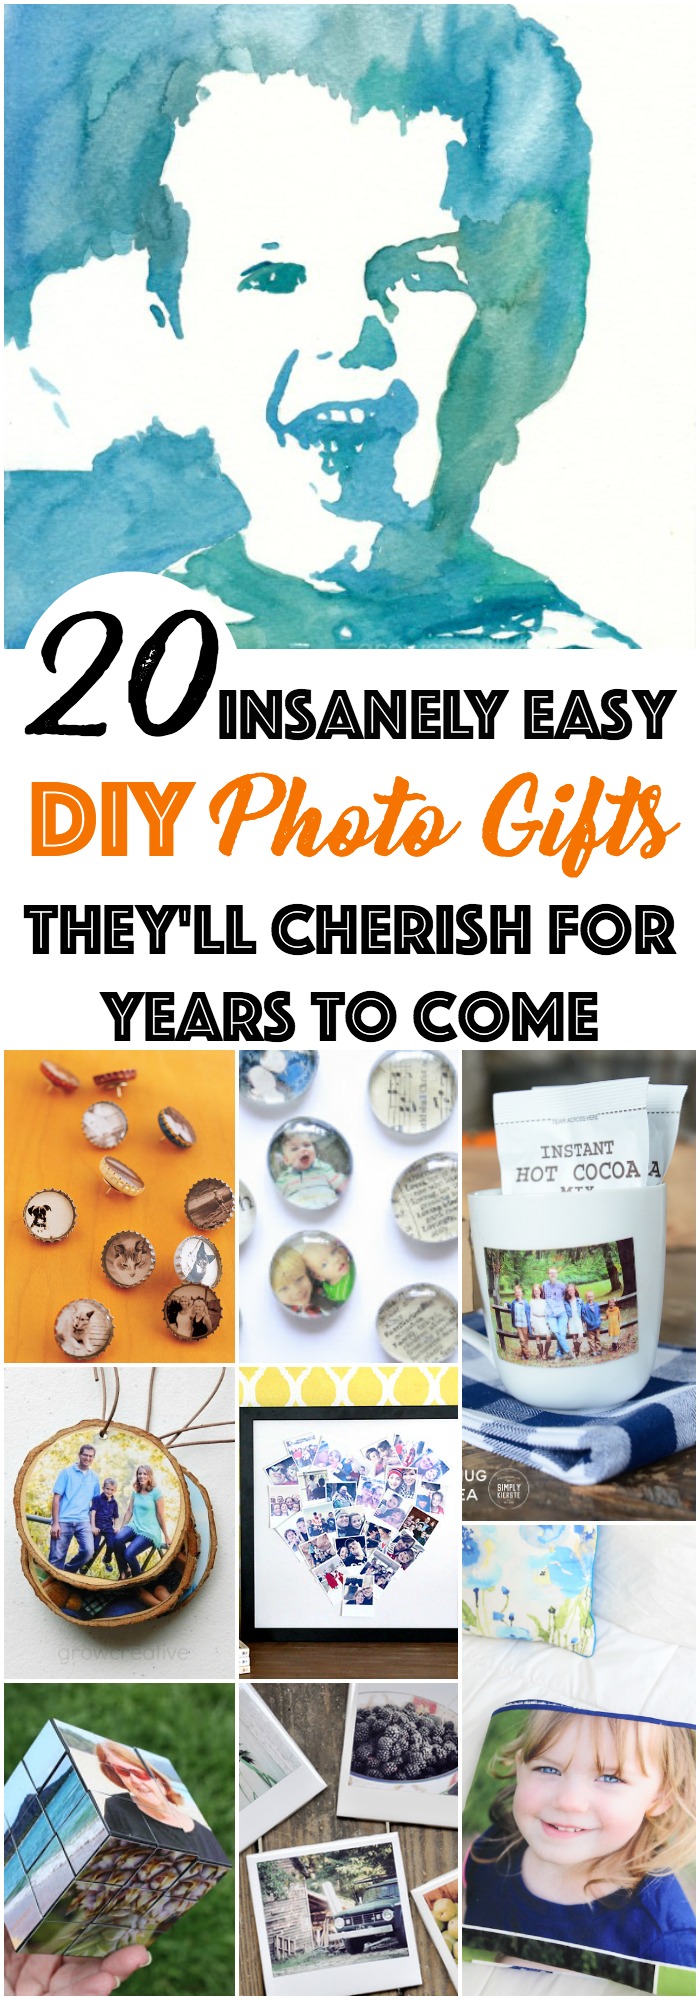 DIY Photo Gifts They'll Love